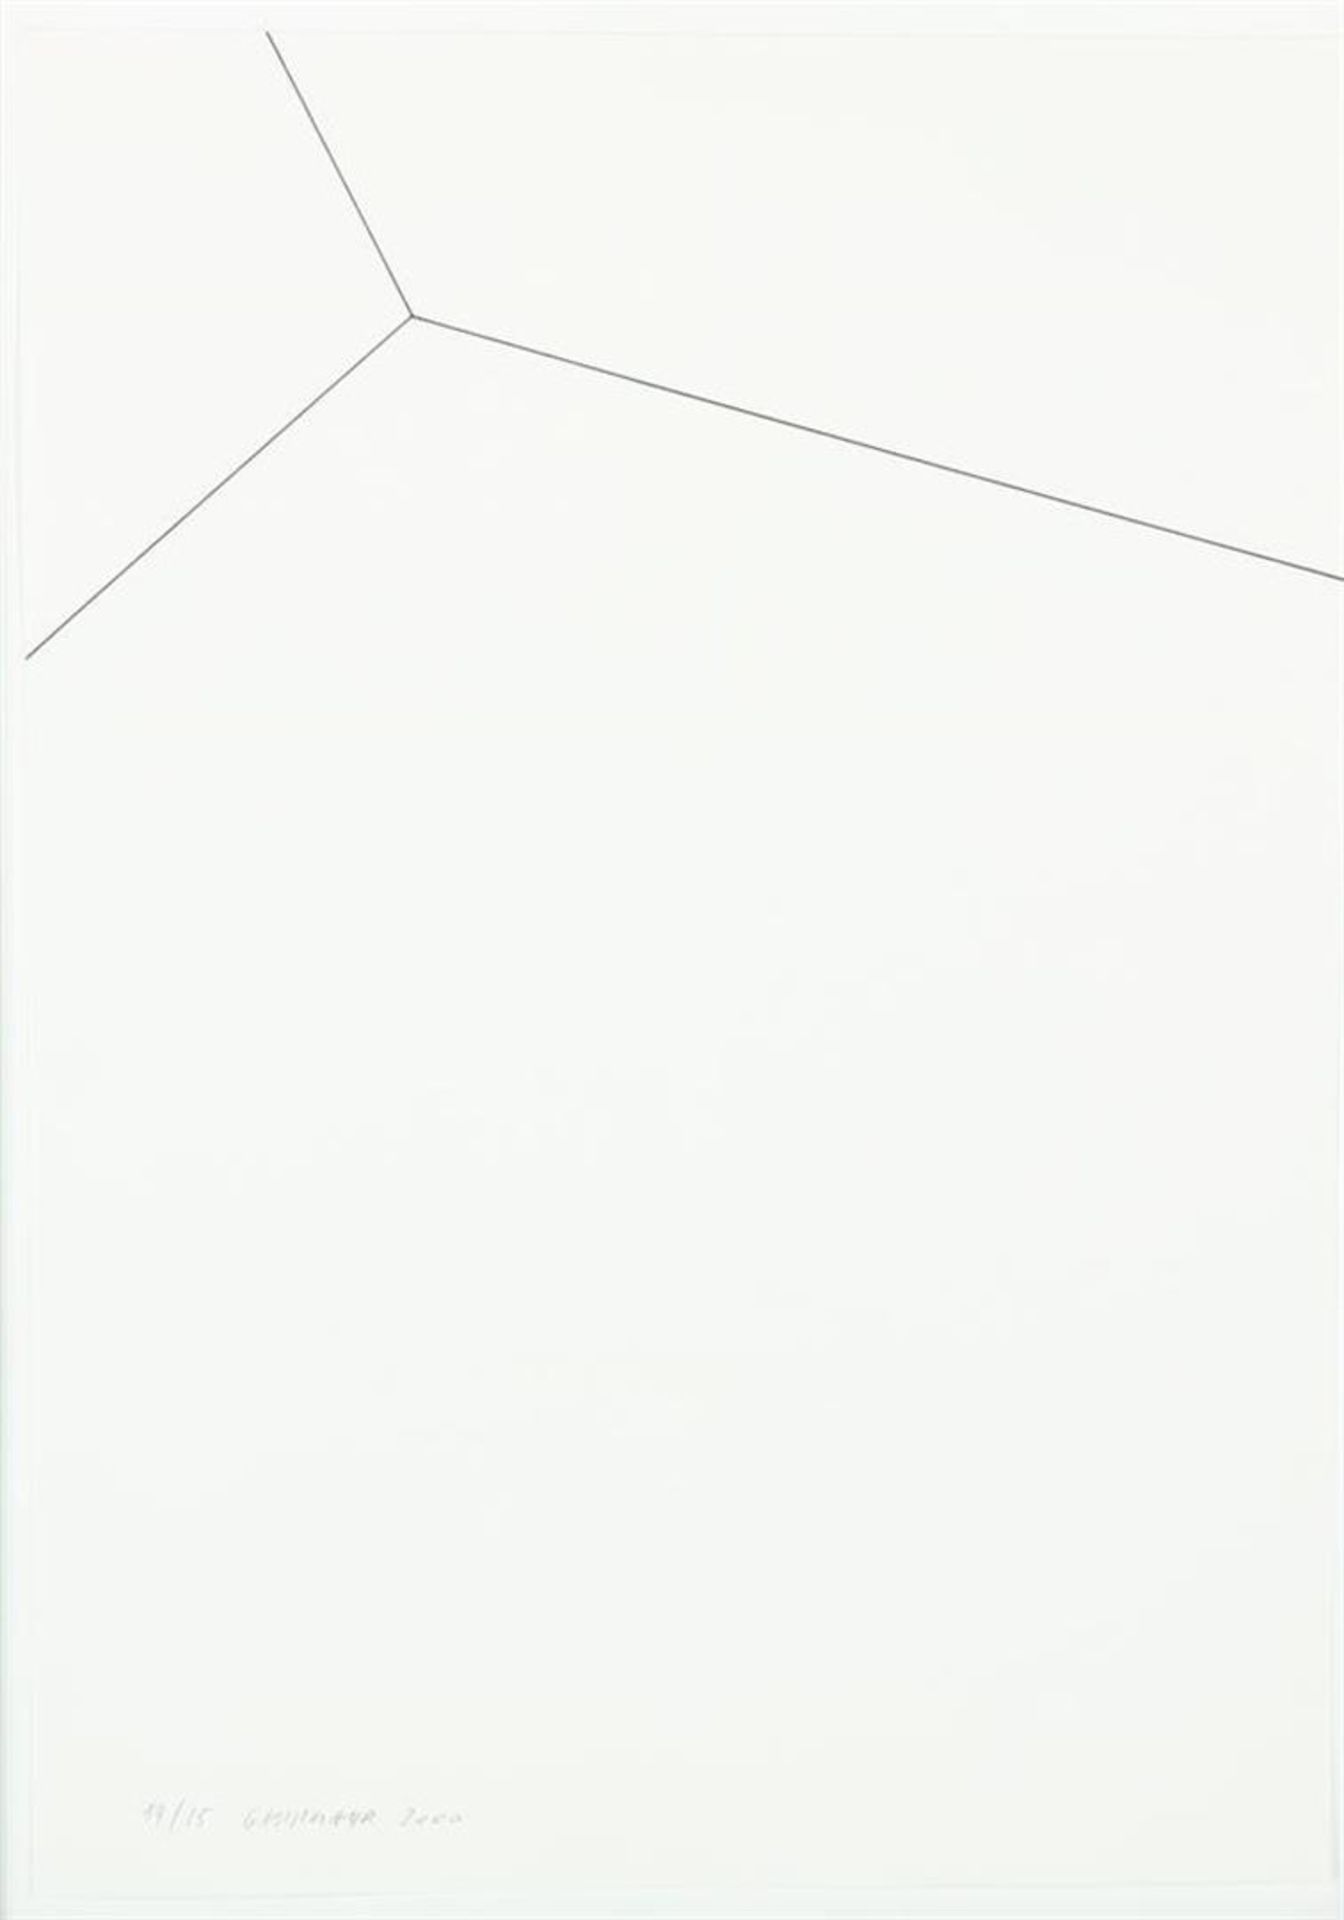 Heinz Gappmayr (1925-2010) series of 5 abstracts, signed lower right and dated 2000, all numbered - Image 5 of 12